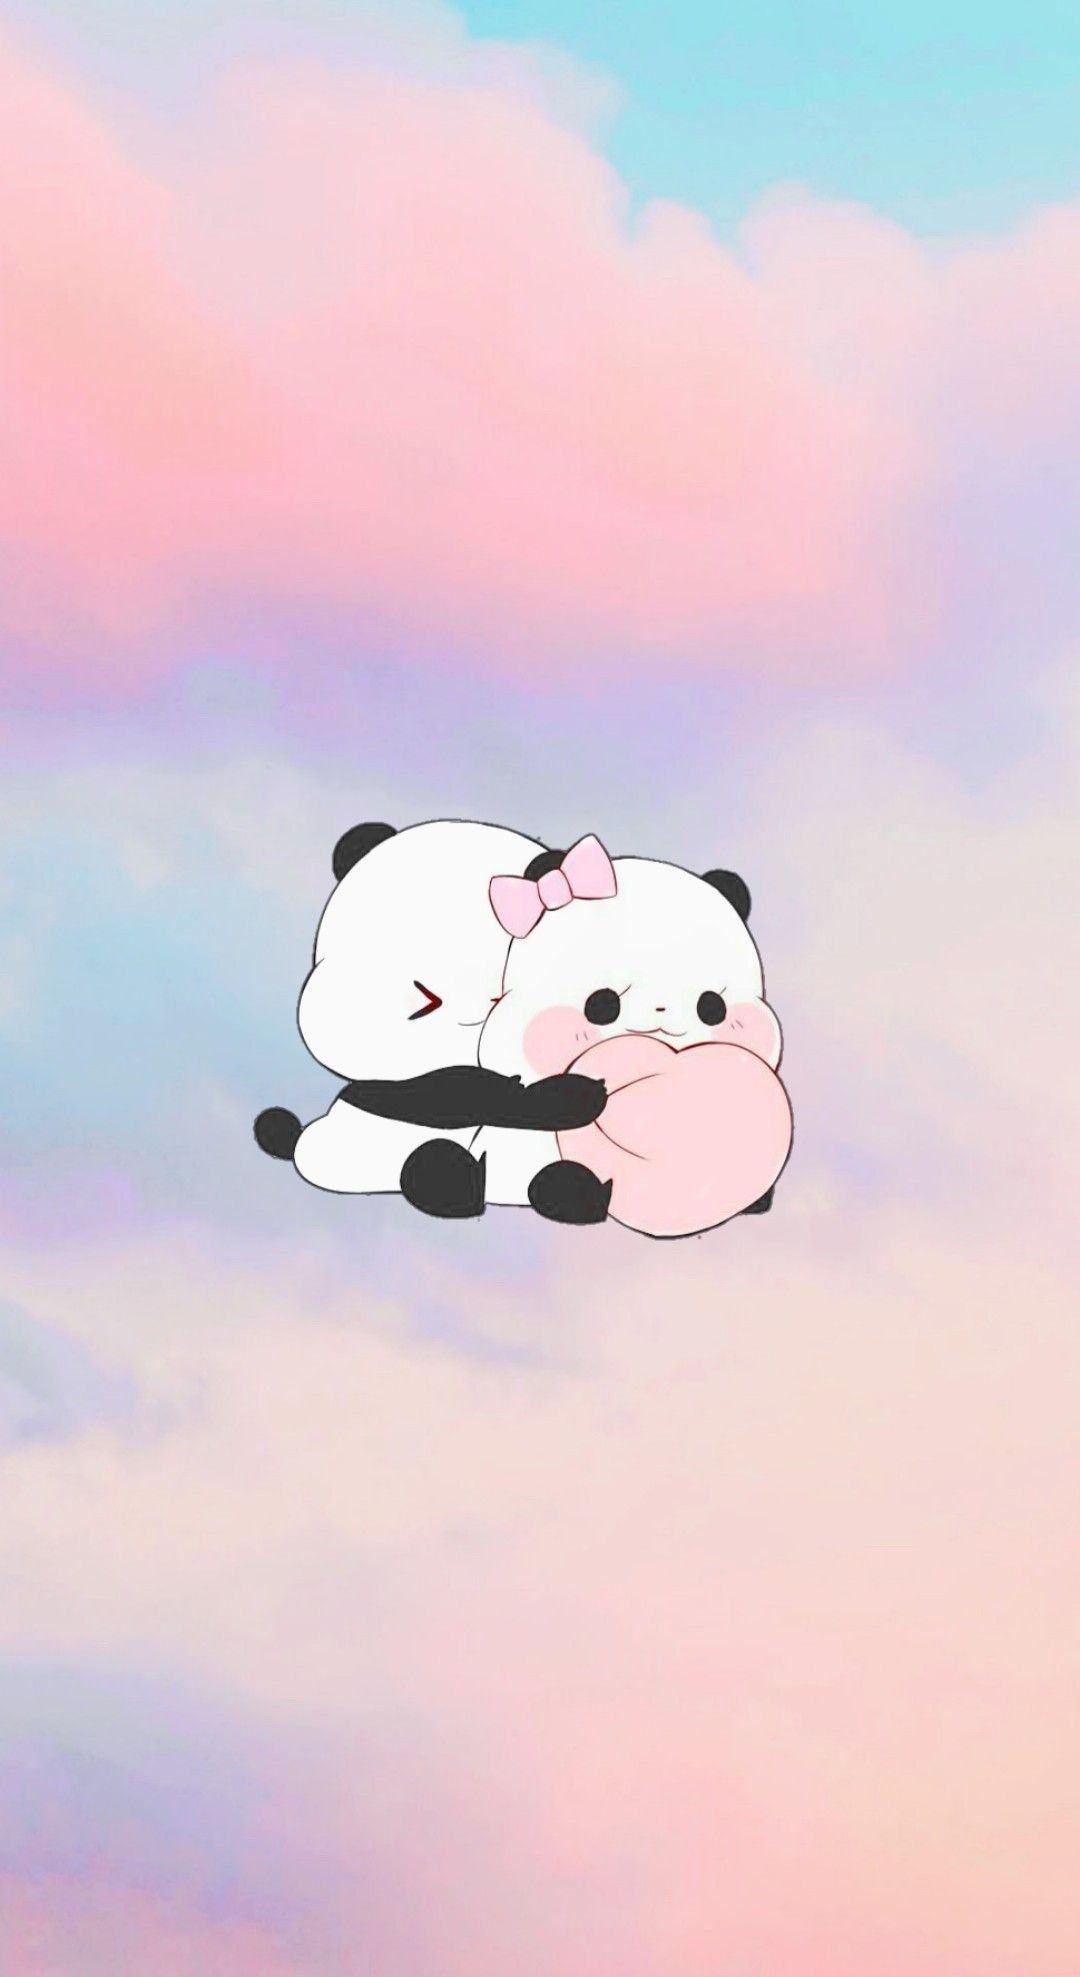 Aesthetic background with pandas on the clouds - Panda